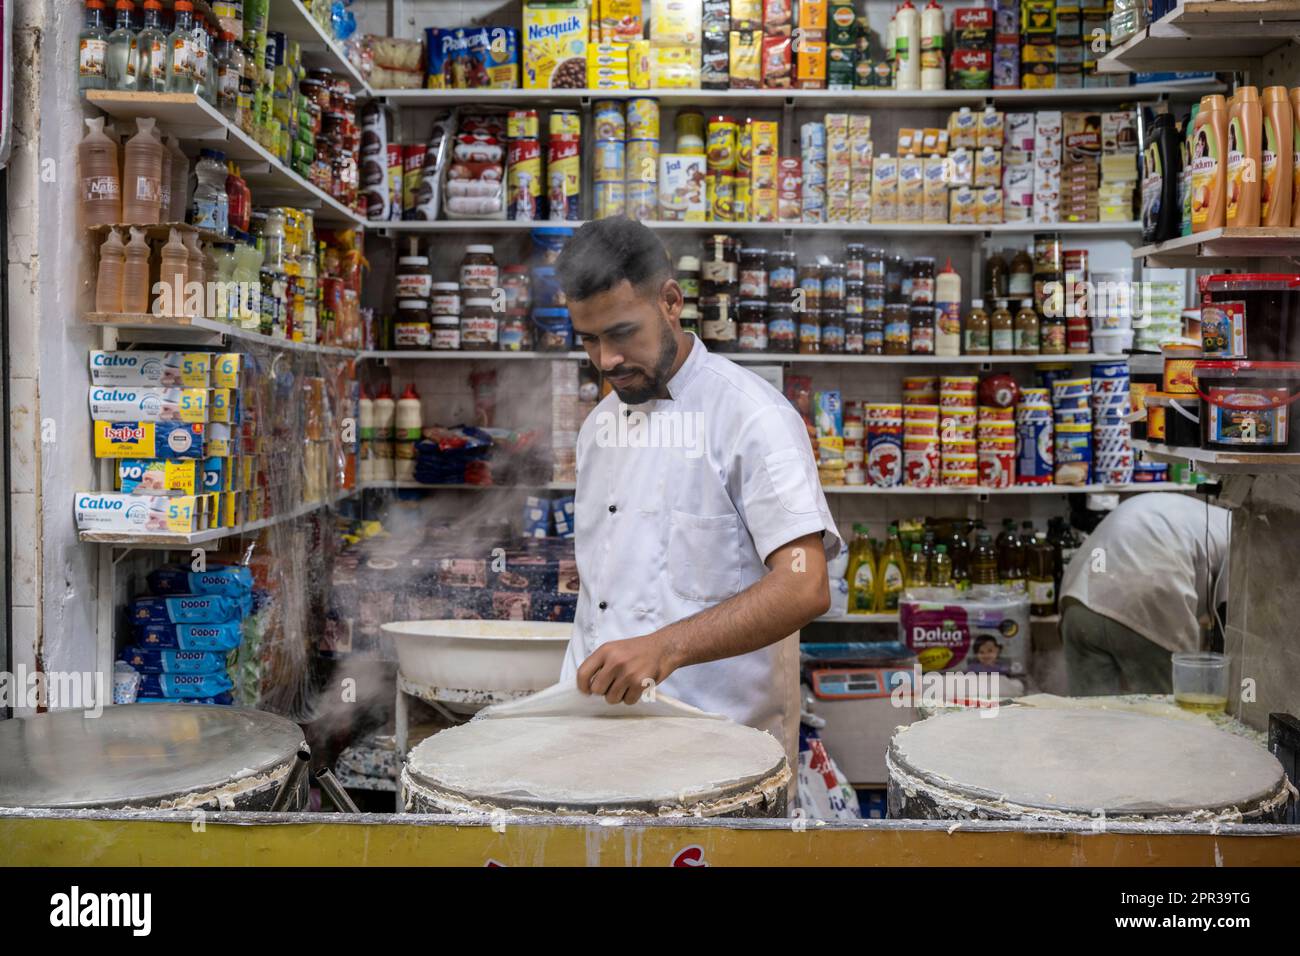 Man preparing pasta sheets to make typical Moroccan sweets in a street stall in the medina of Tangier. Stock Photo